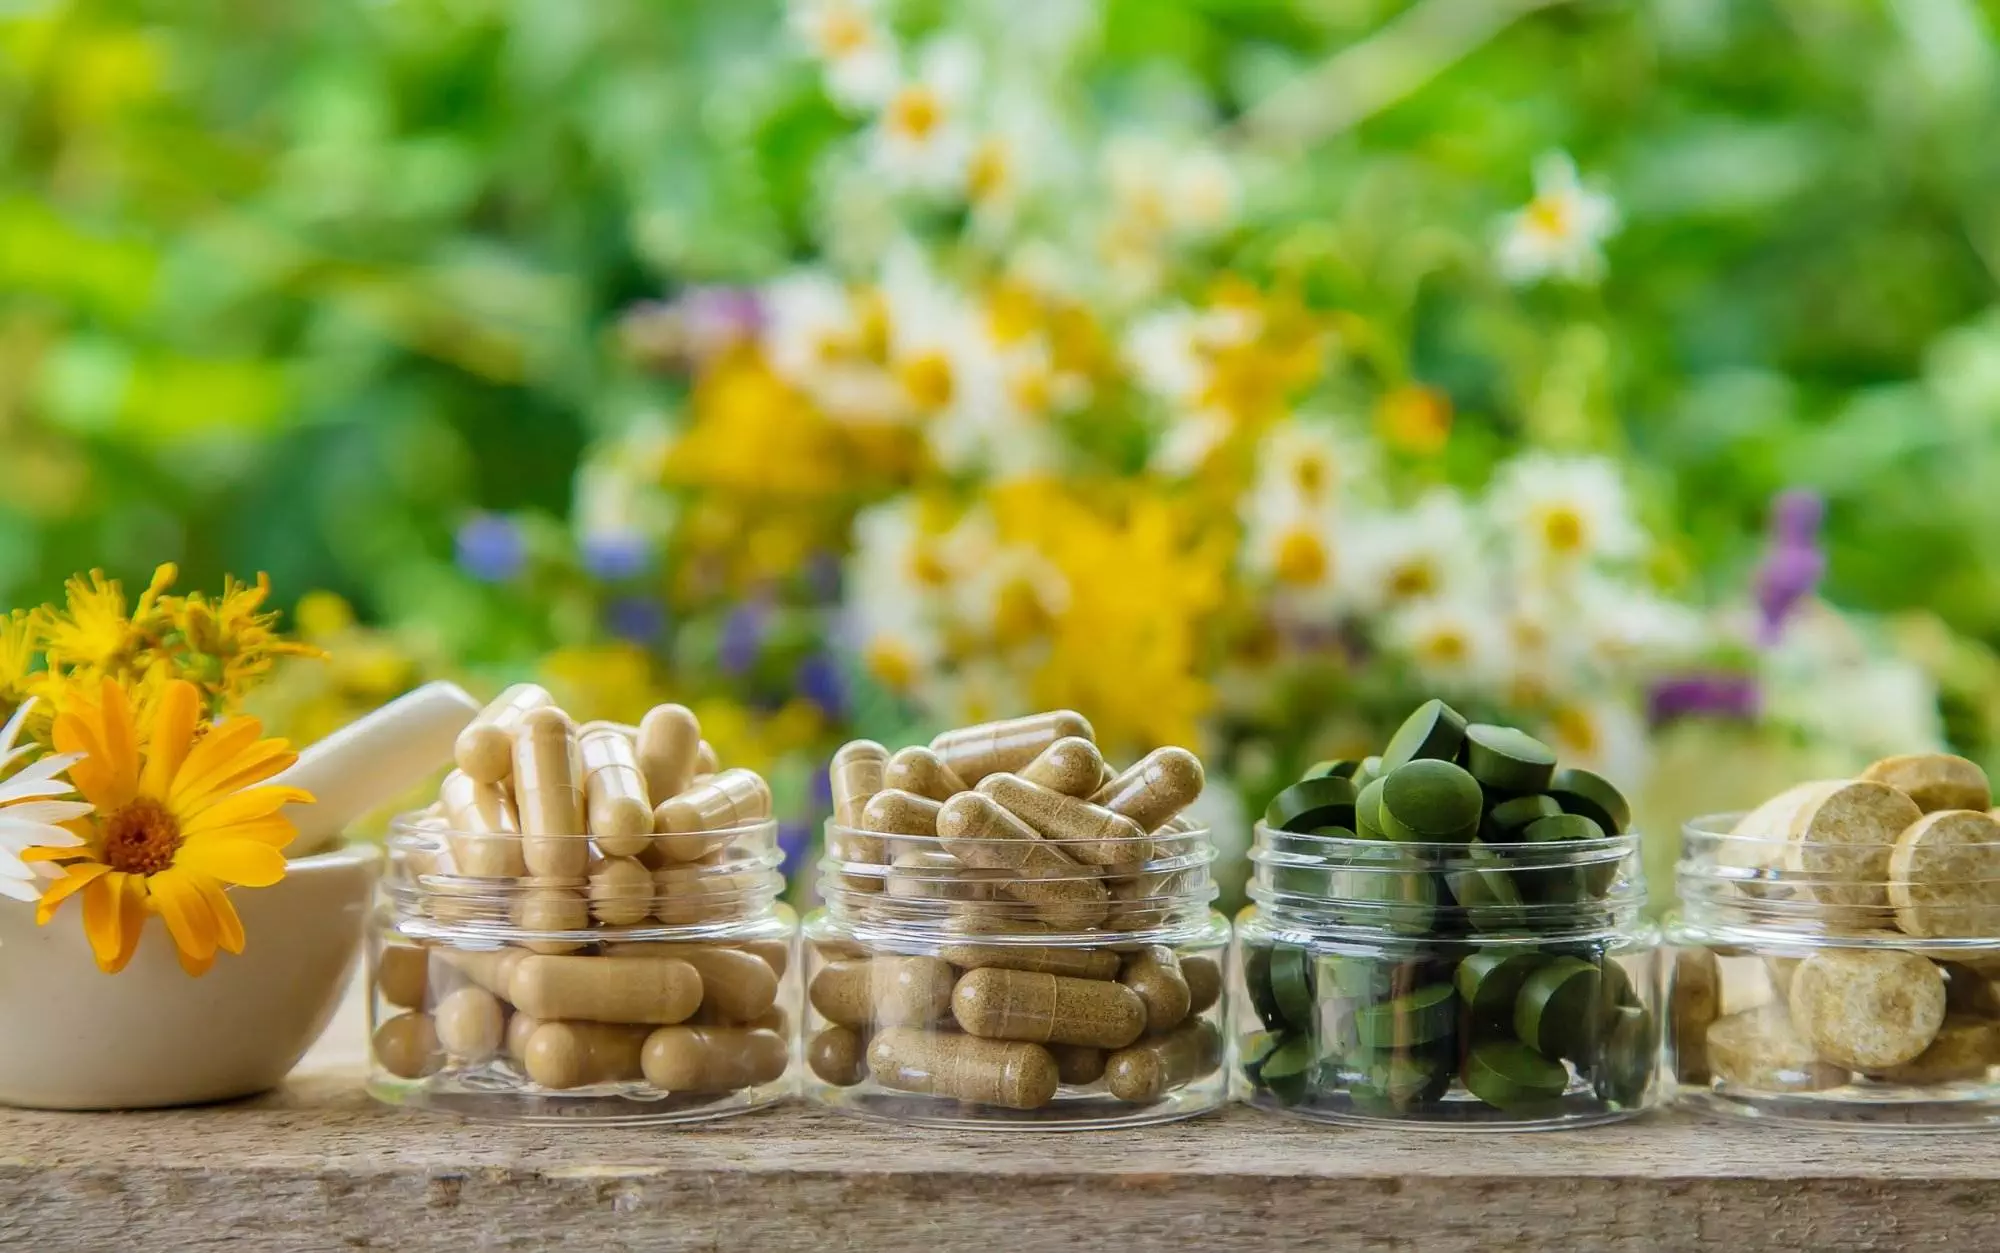 Herbal supplements and flowers on wooden table.